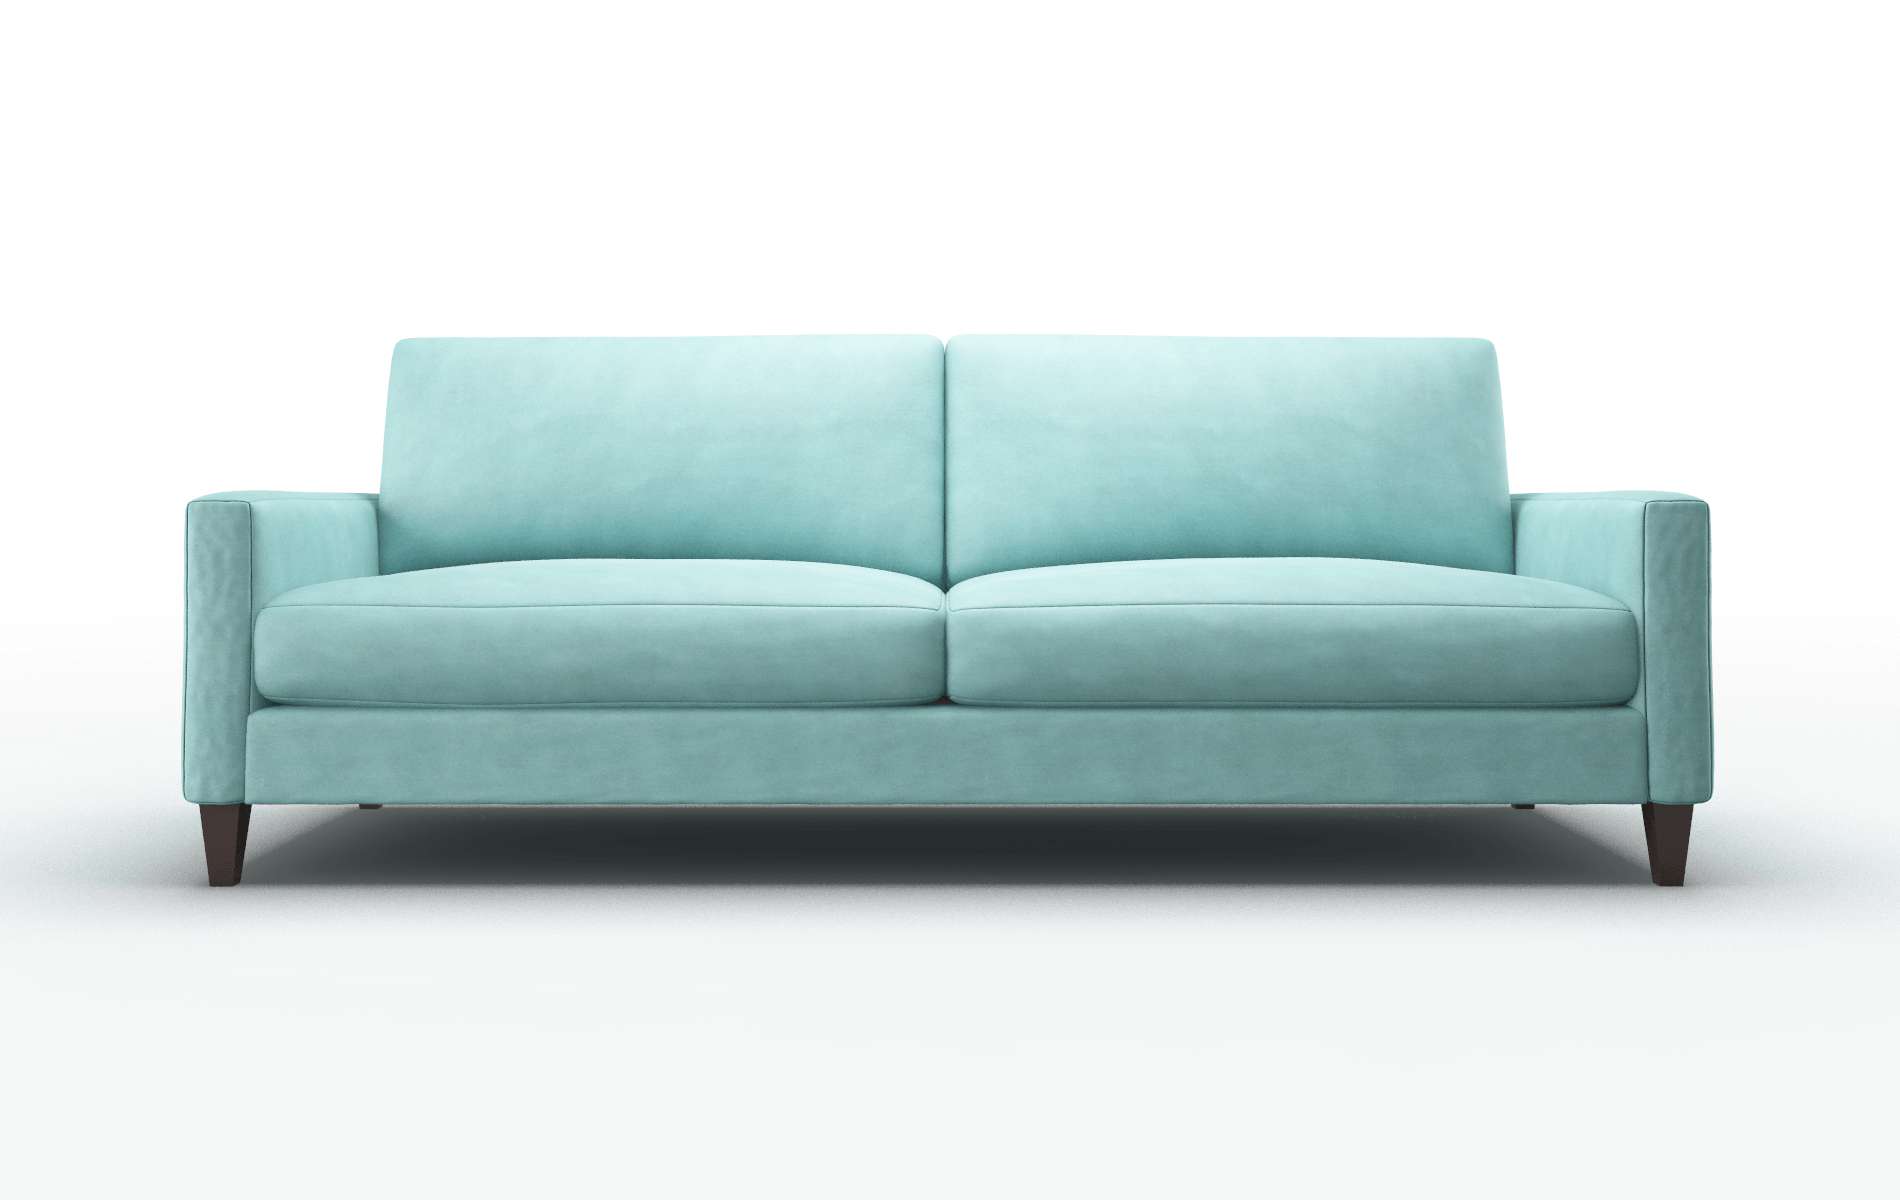 Cannes Curious Turquoise chair espresso legs